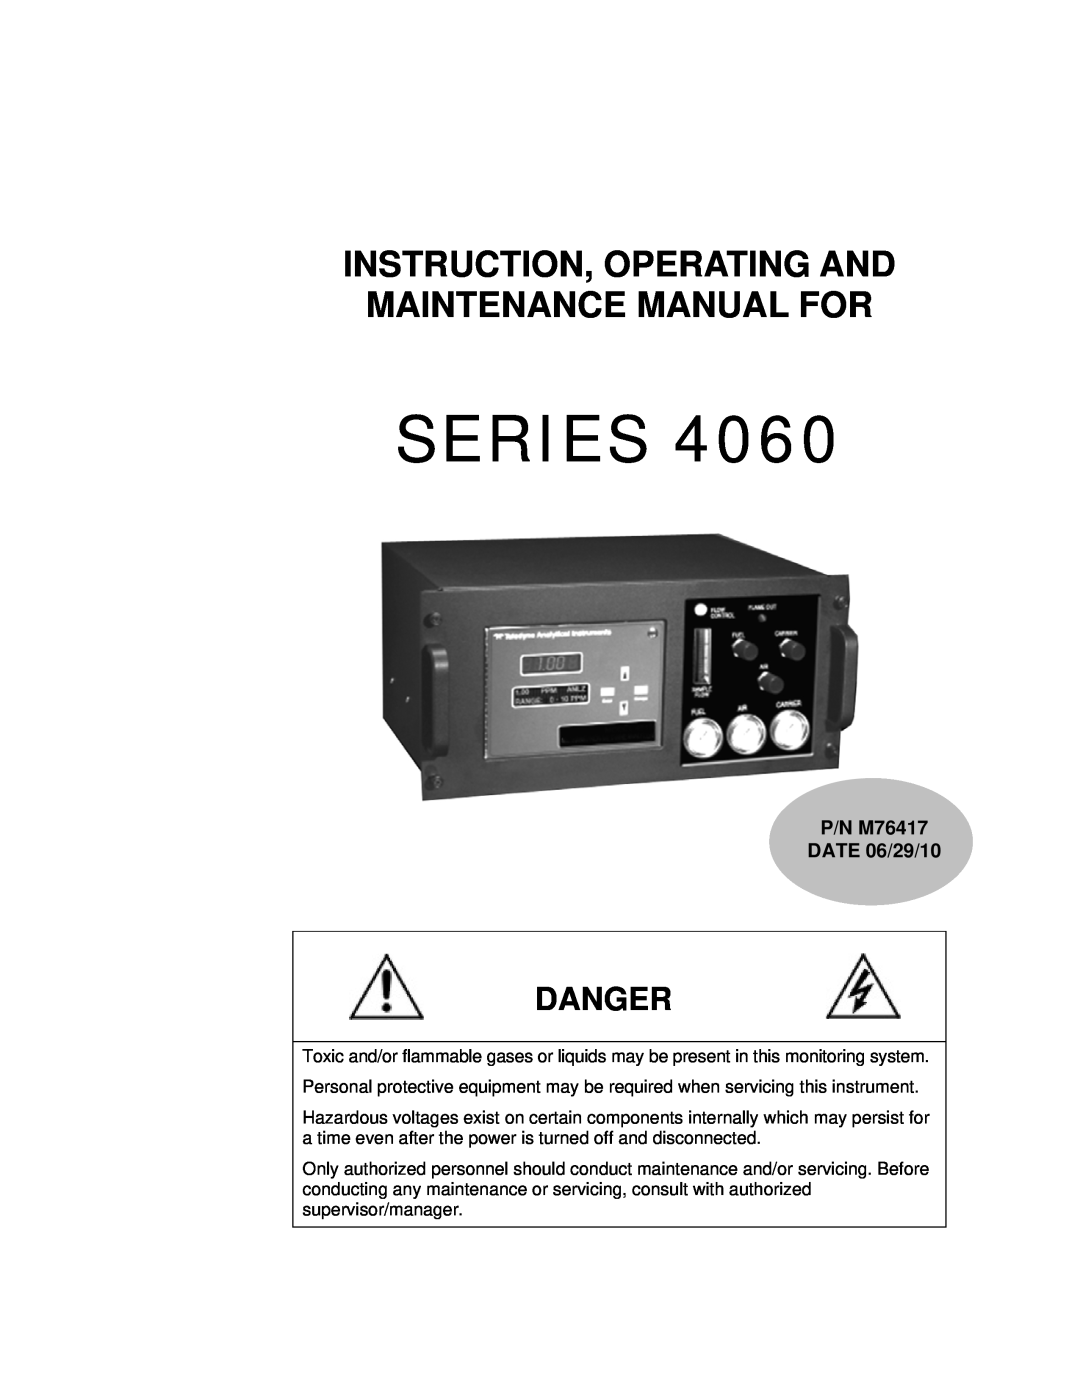 Teledyne 4060 manual Danger, Series, Instruction, Operating And Maintenance Manual For, P/N M76417 DATE 06/29/10 